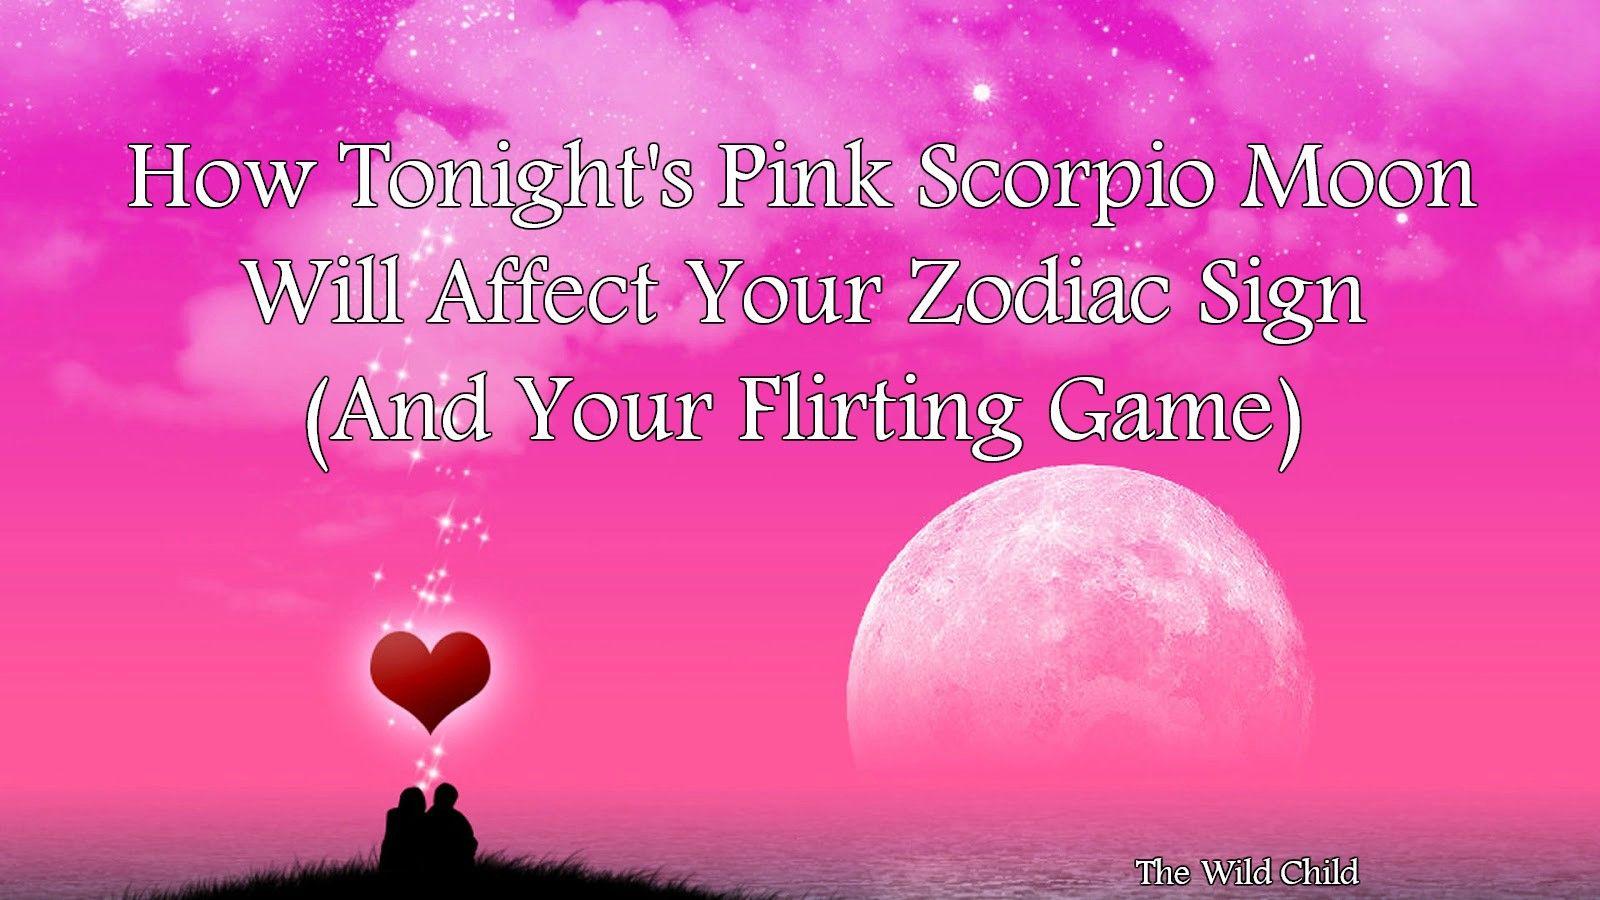 How Tonight's Pink Scorpio Moon Will Affect Your Zodiac Sign And